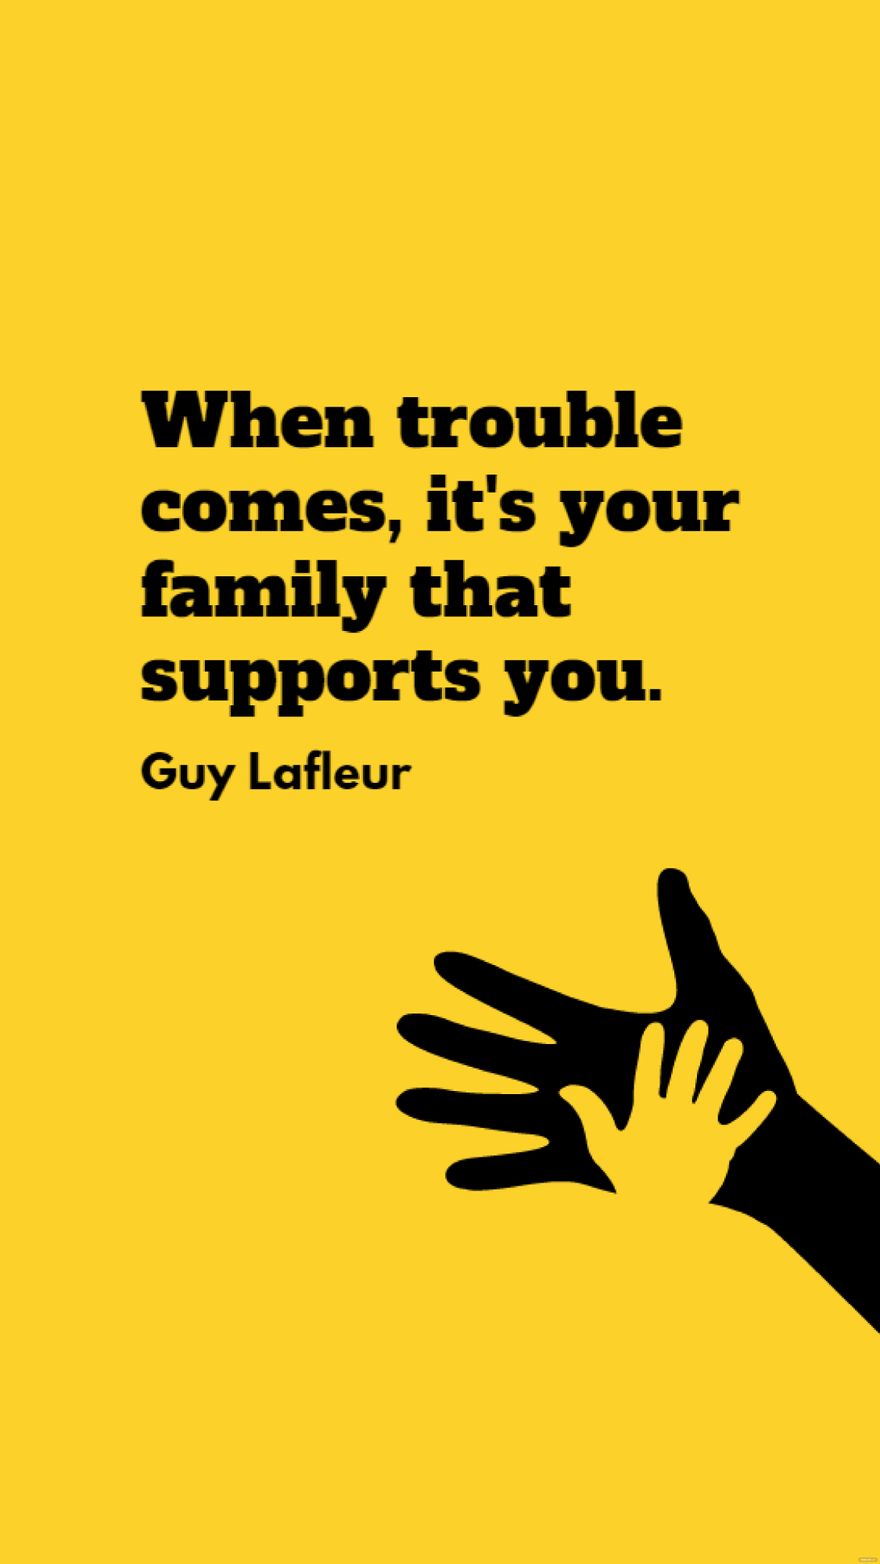 Guy Lafleur - When trouble comes, it's your family that supports you.